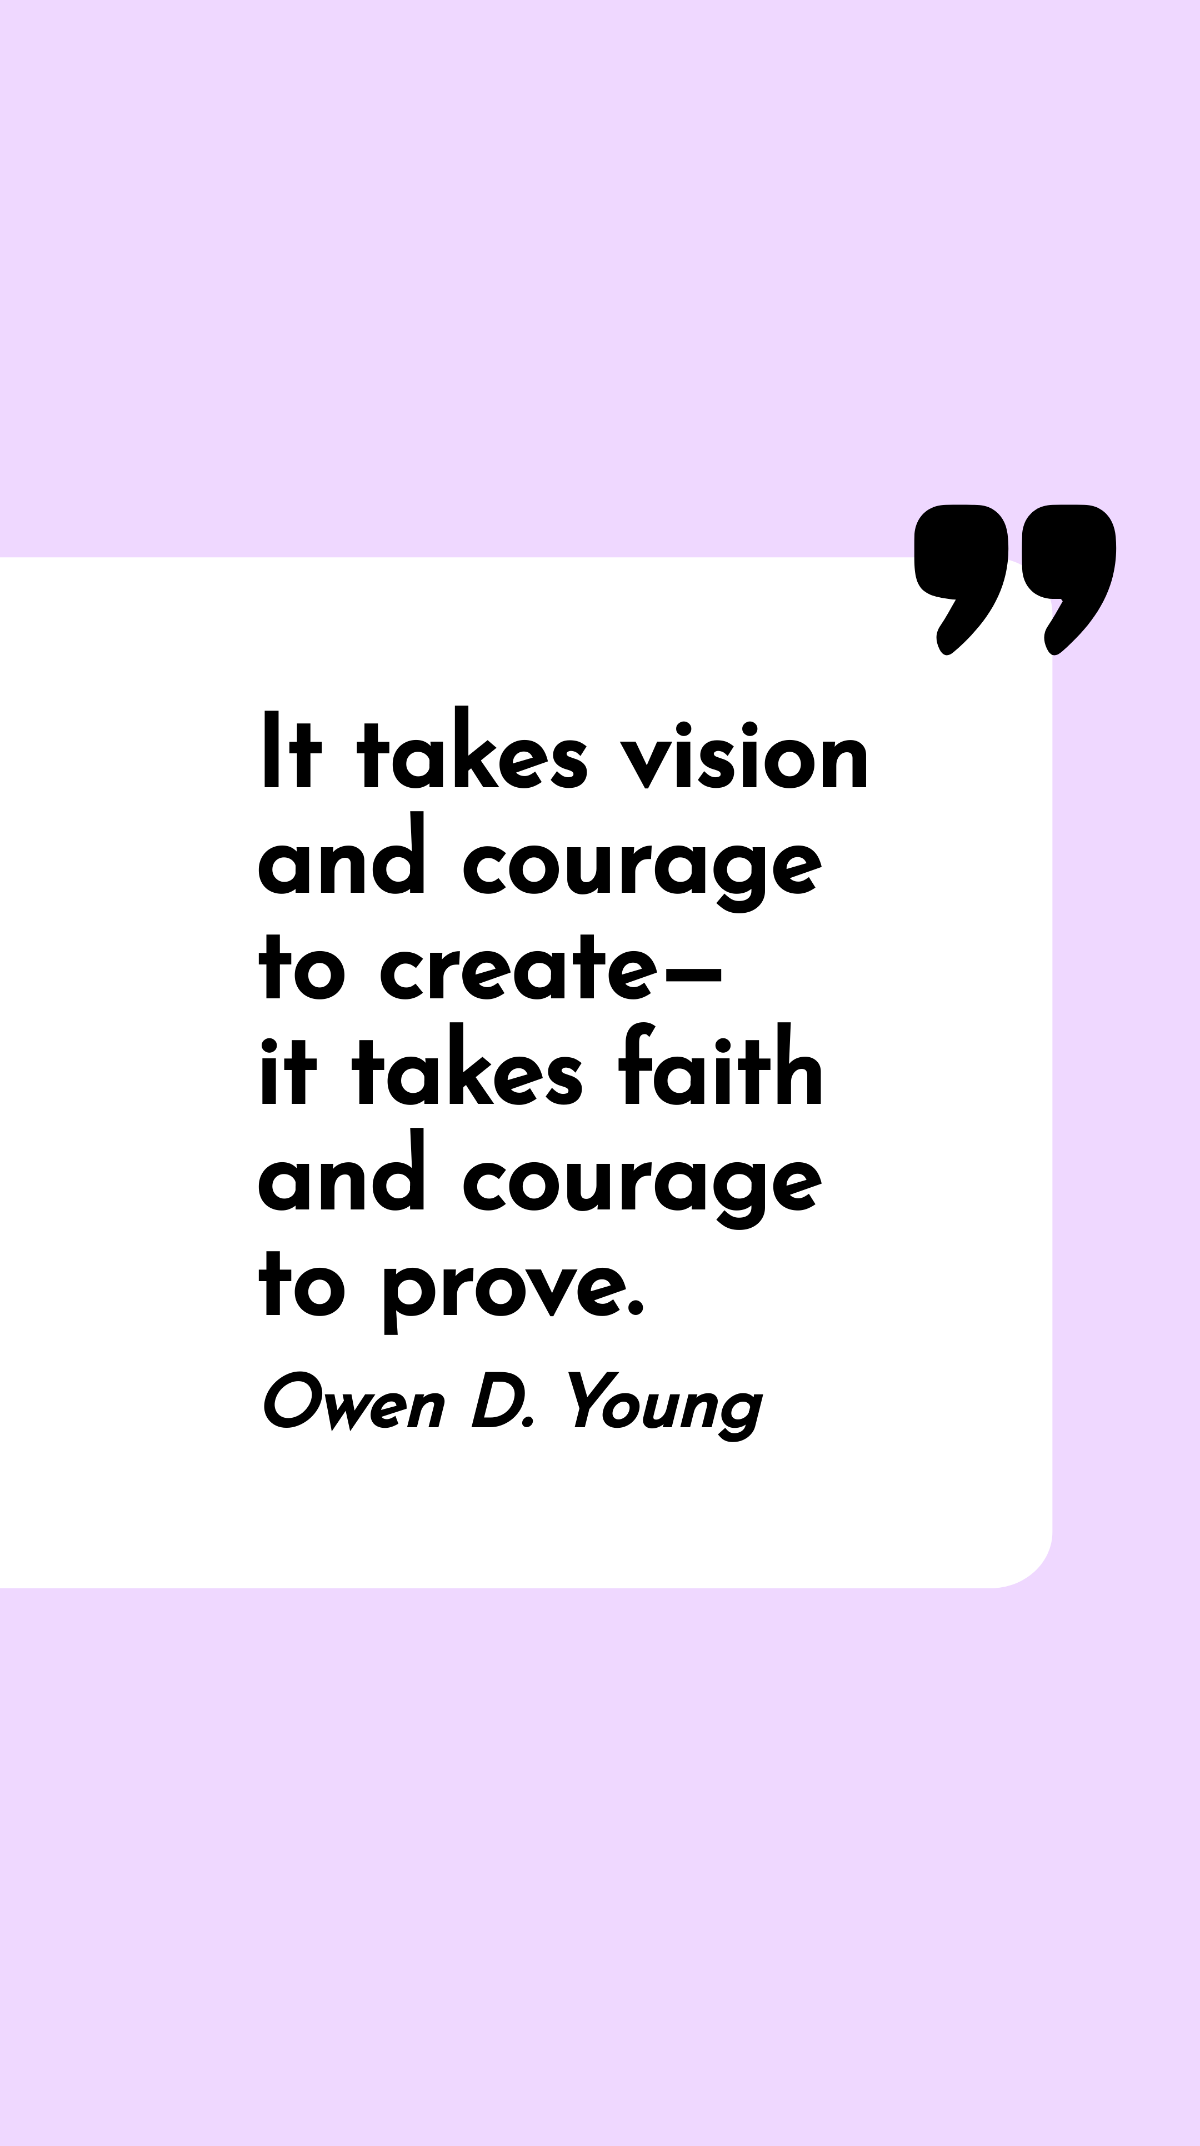 Owen D. Young - It takes vision and courage to create - it takes faith and courage to prove.